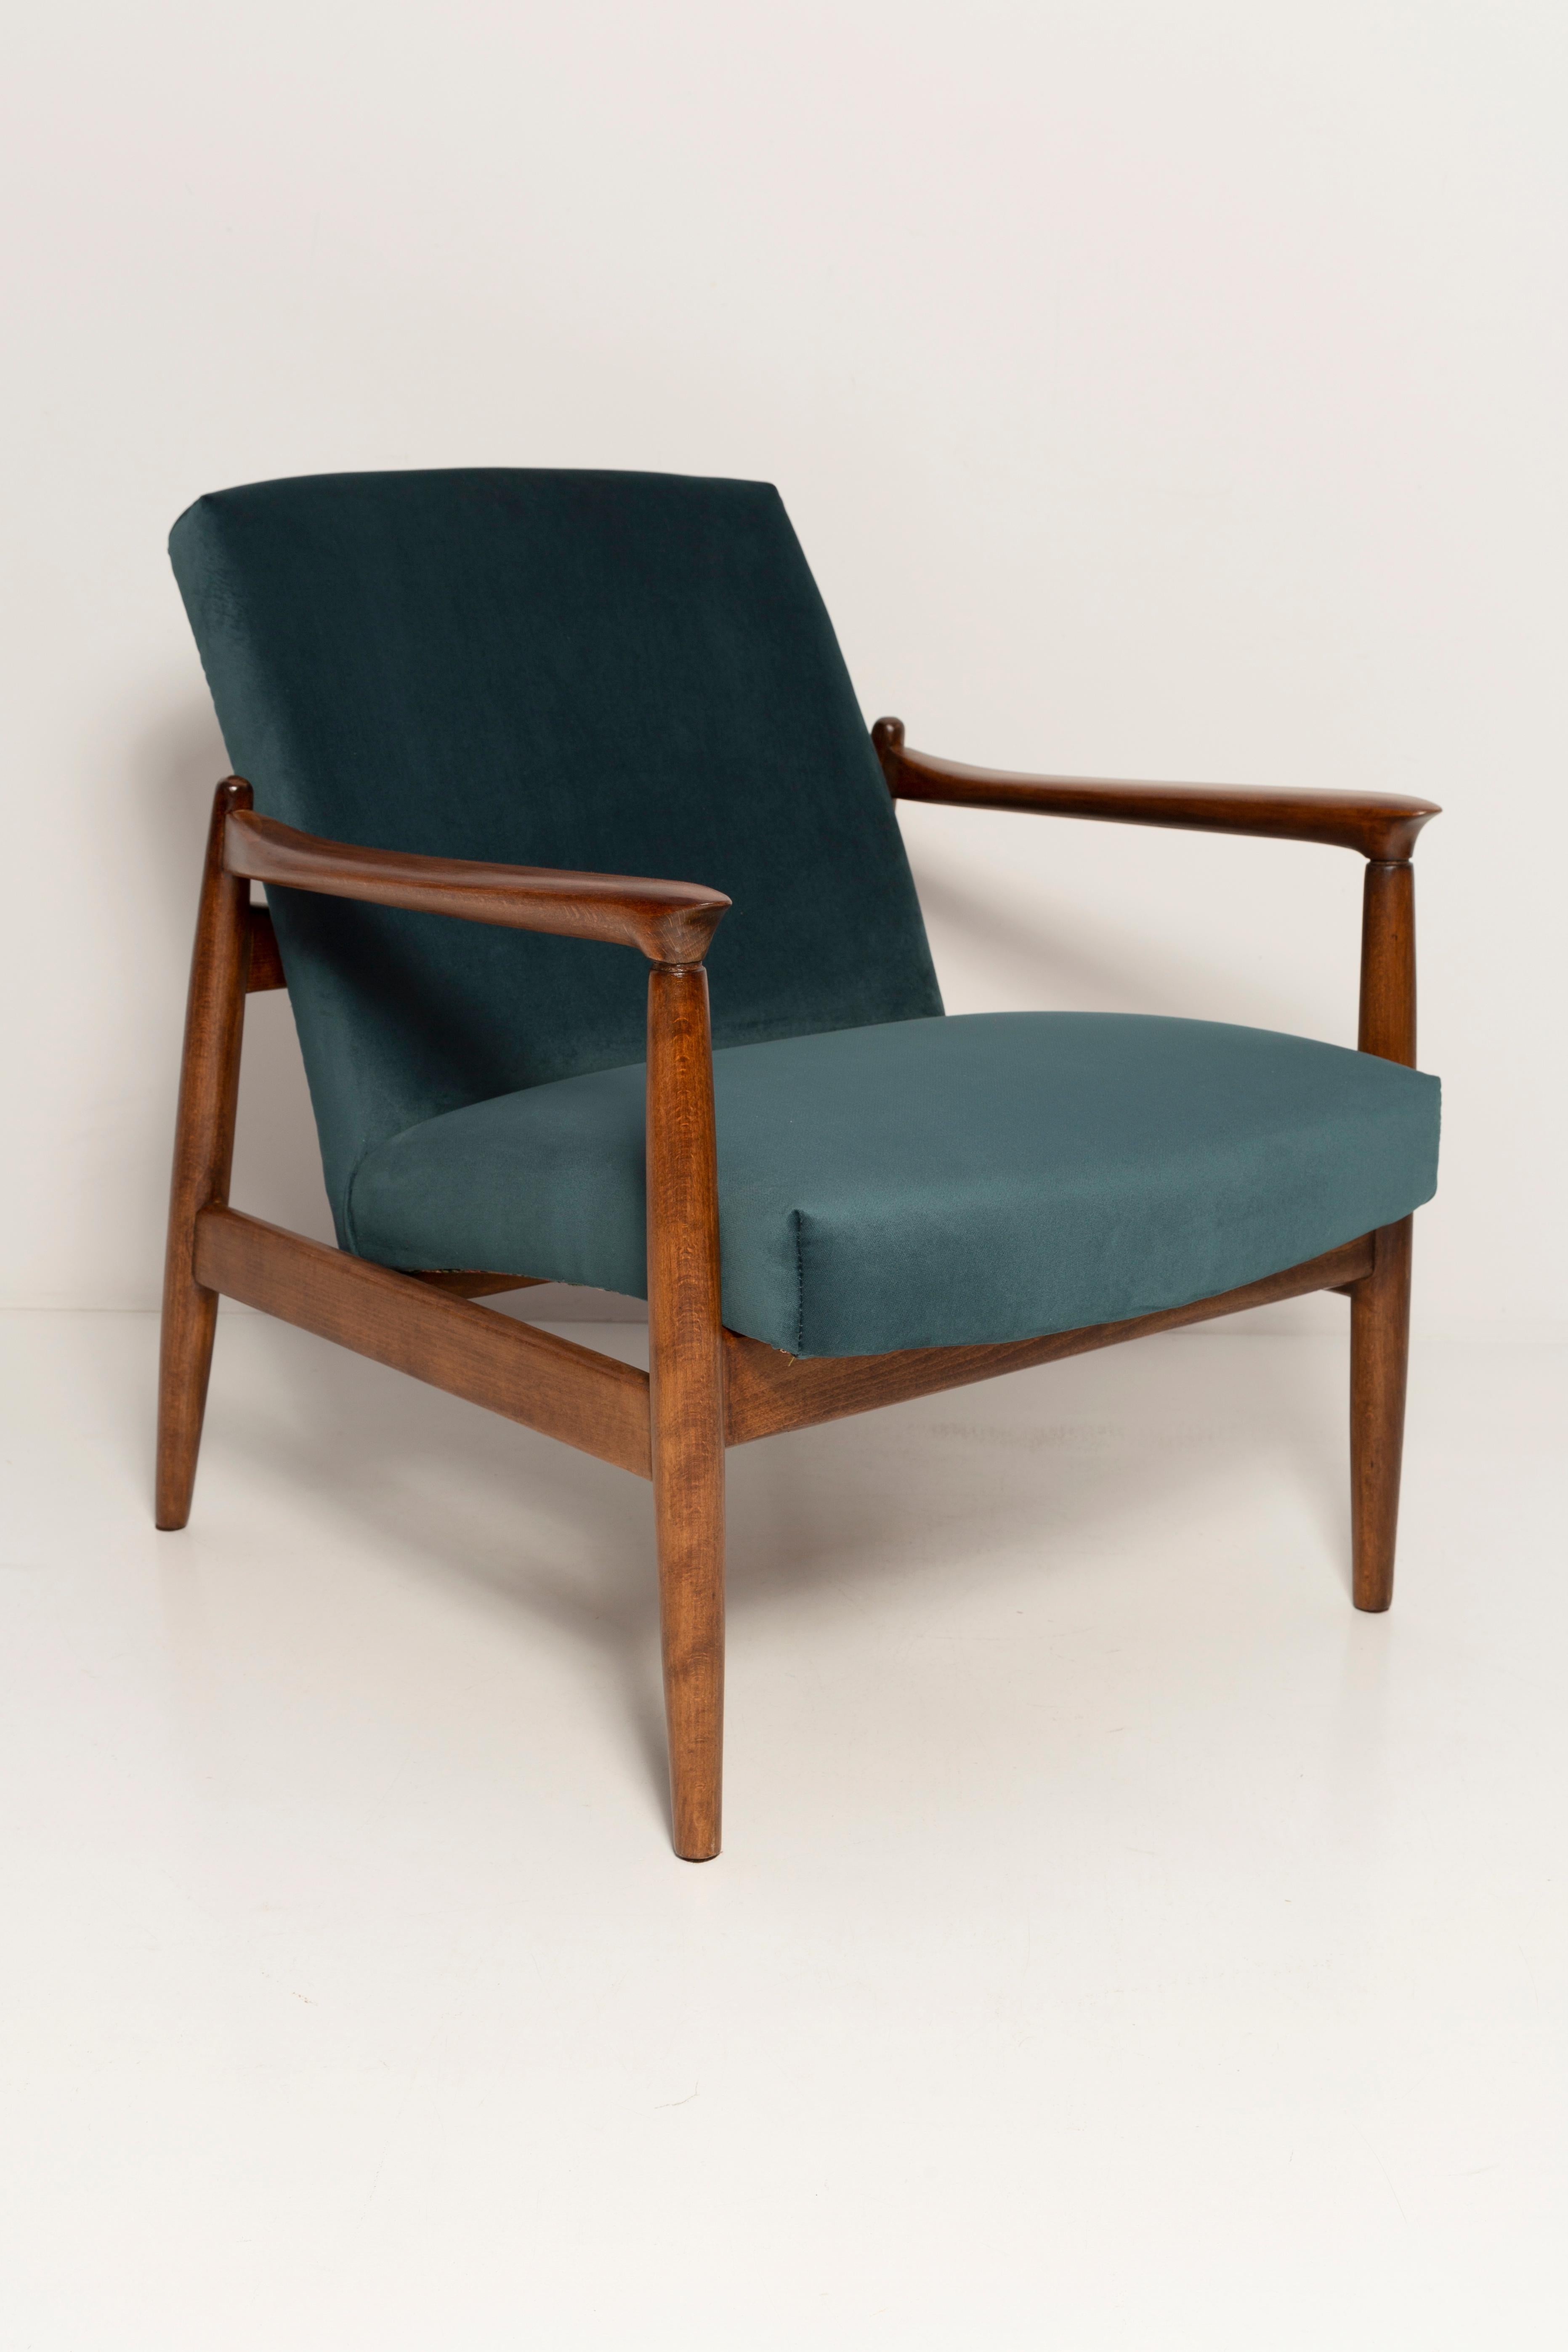 Hand-Crafted Pair of Midcentury Petrol Blue Armchairs, Edmund Homa, Poland, 1960s For Sale